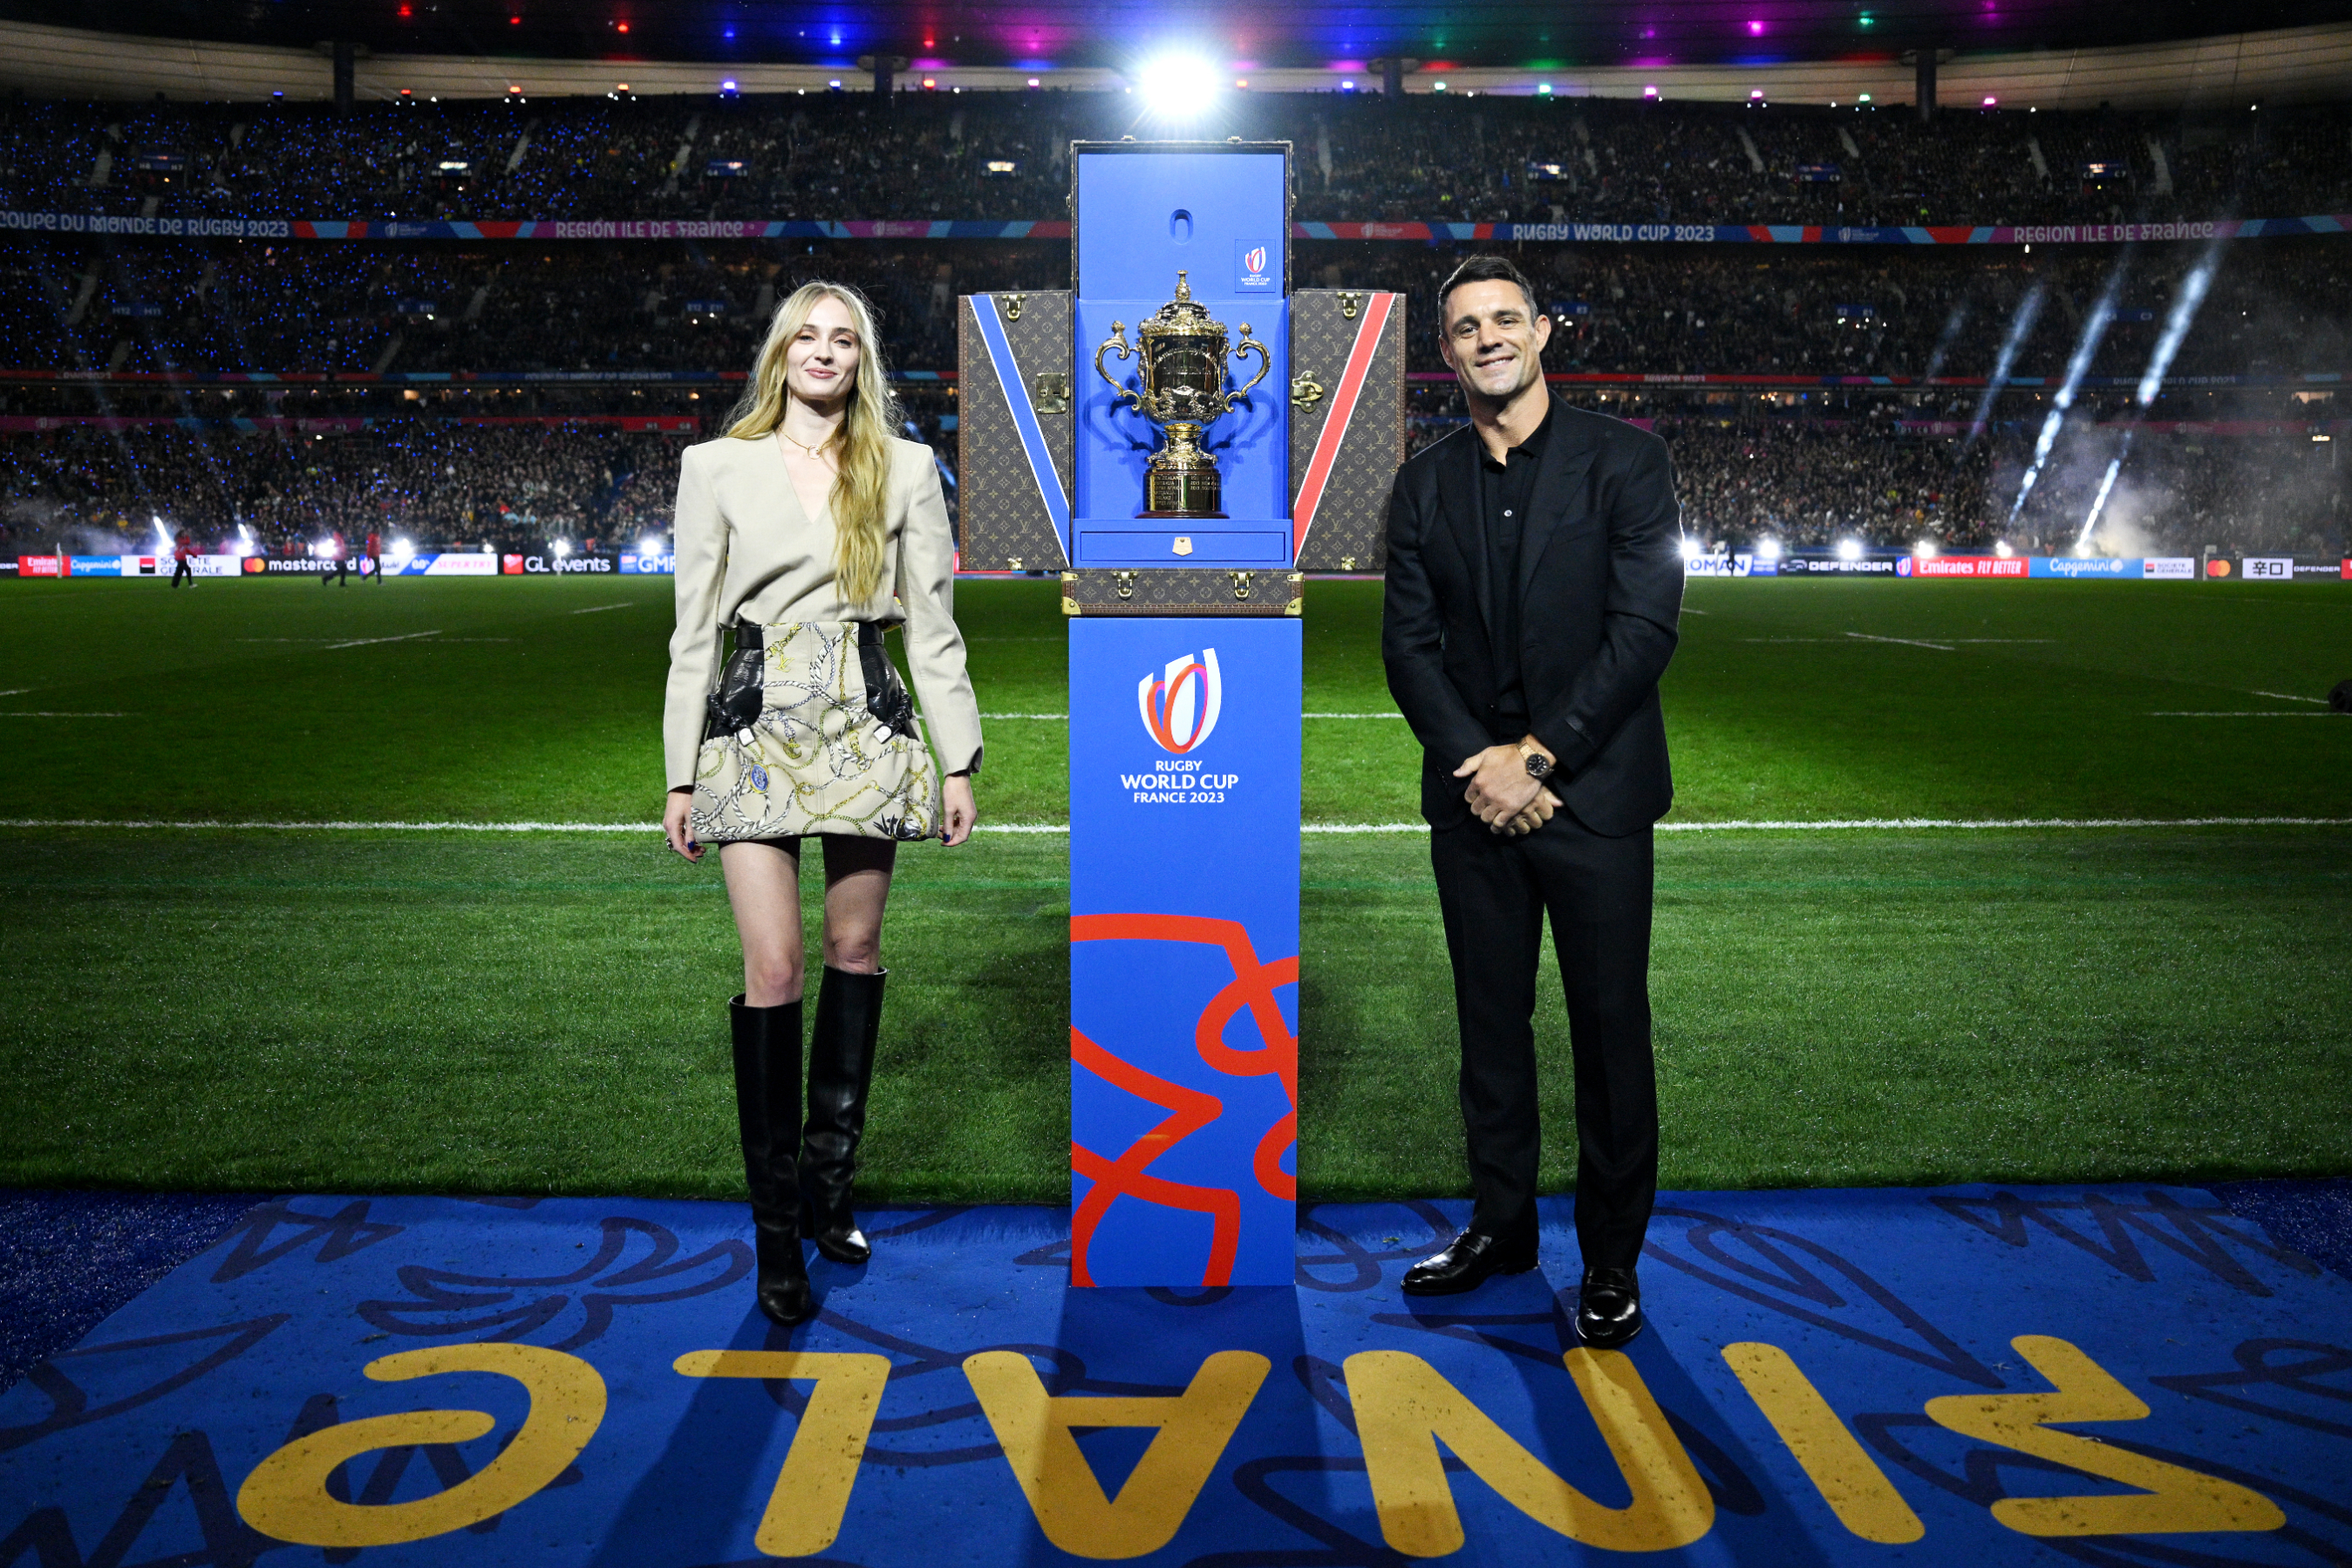 Sophie Turner on the pitch standing next to the trophy